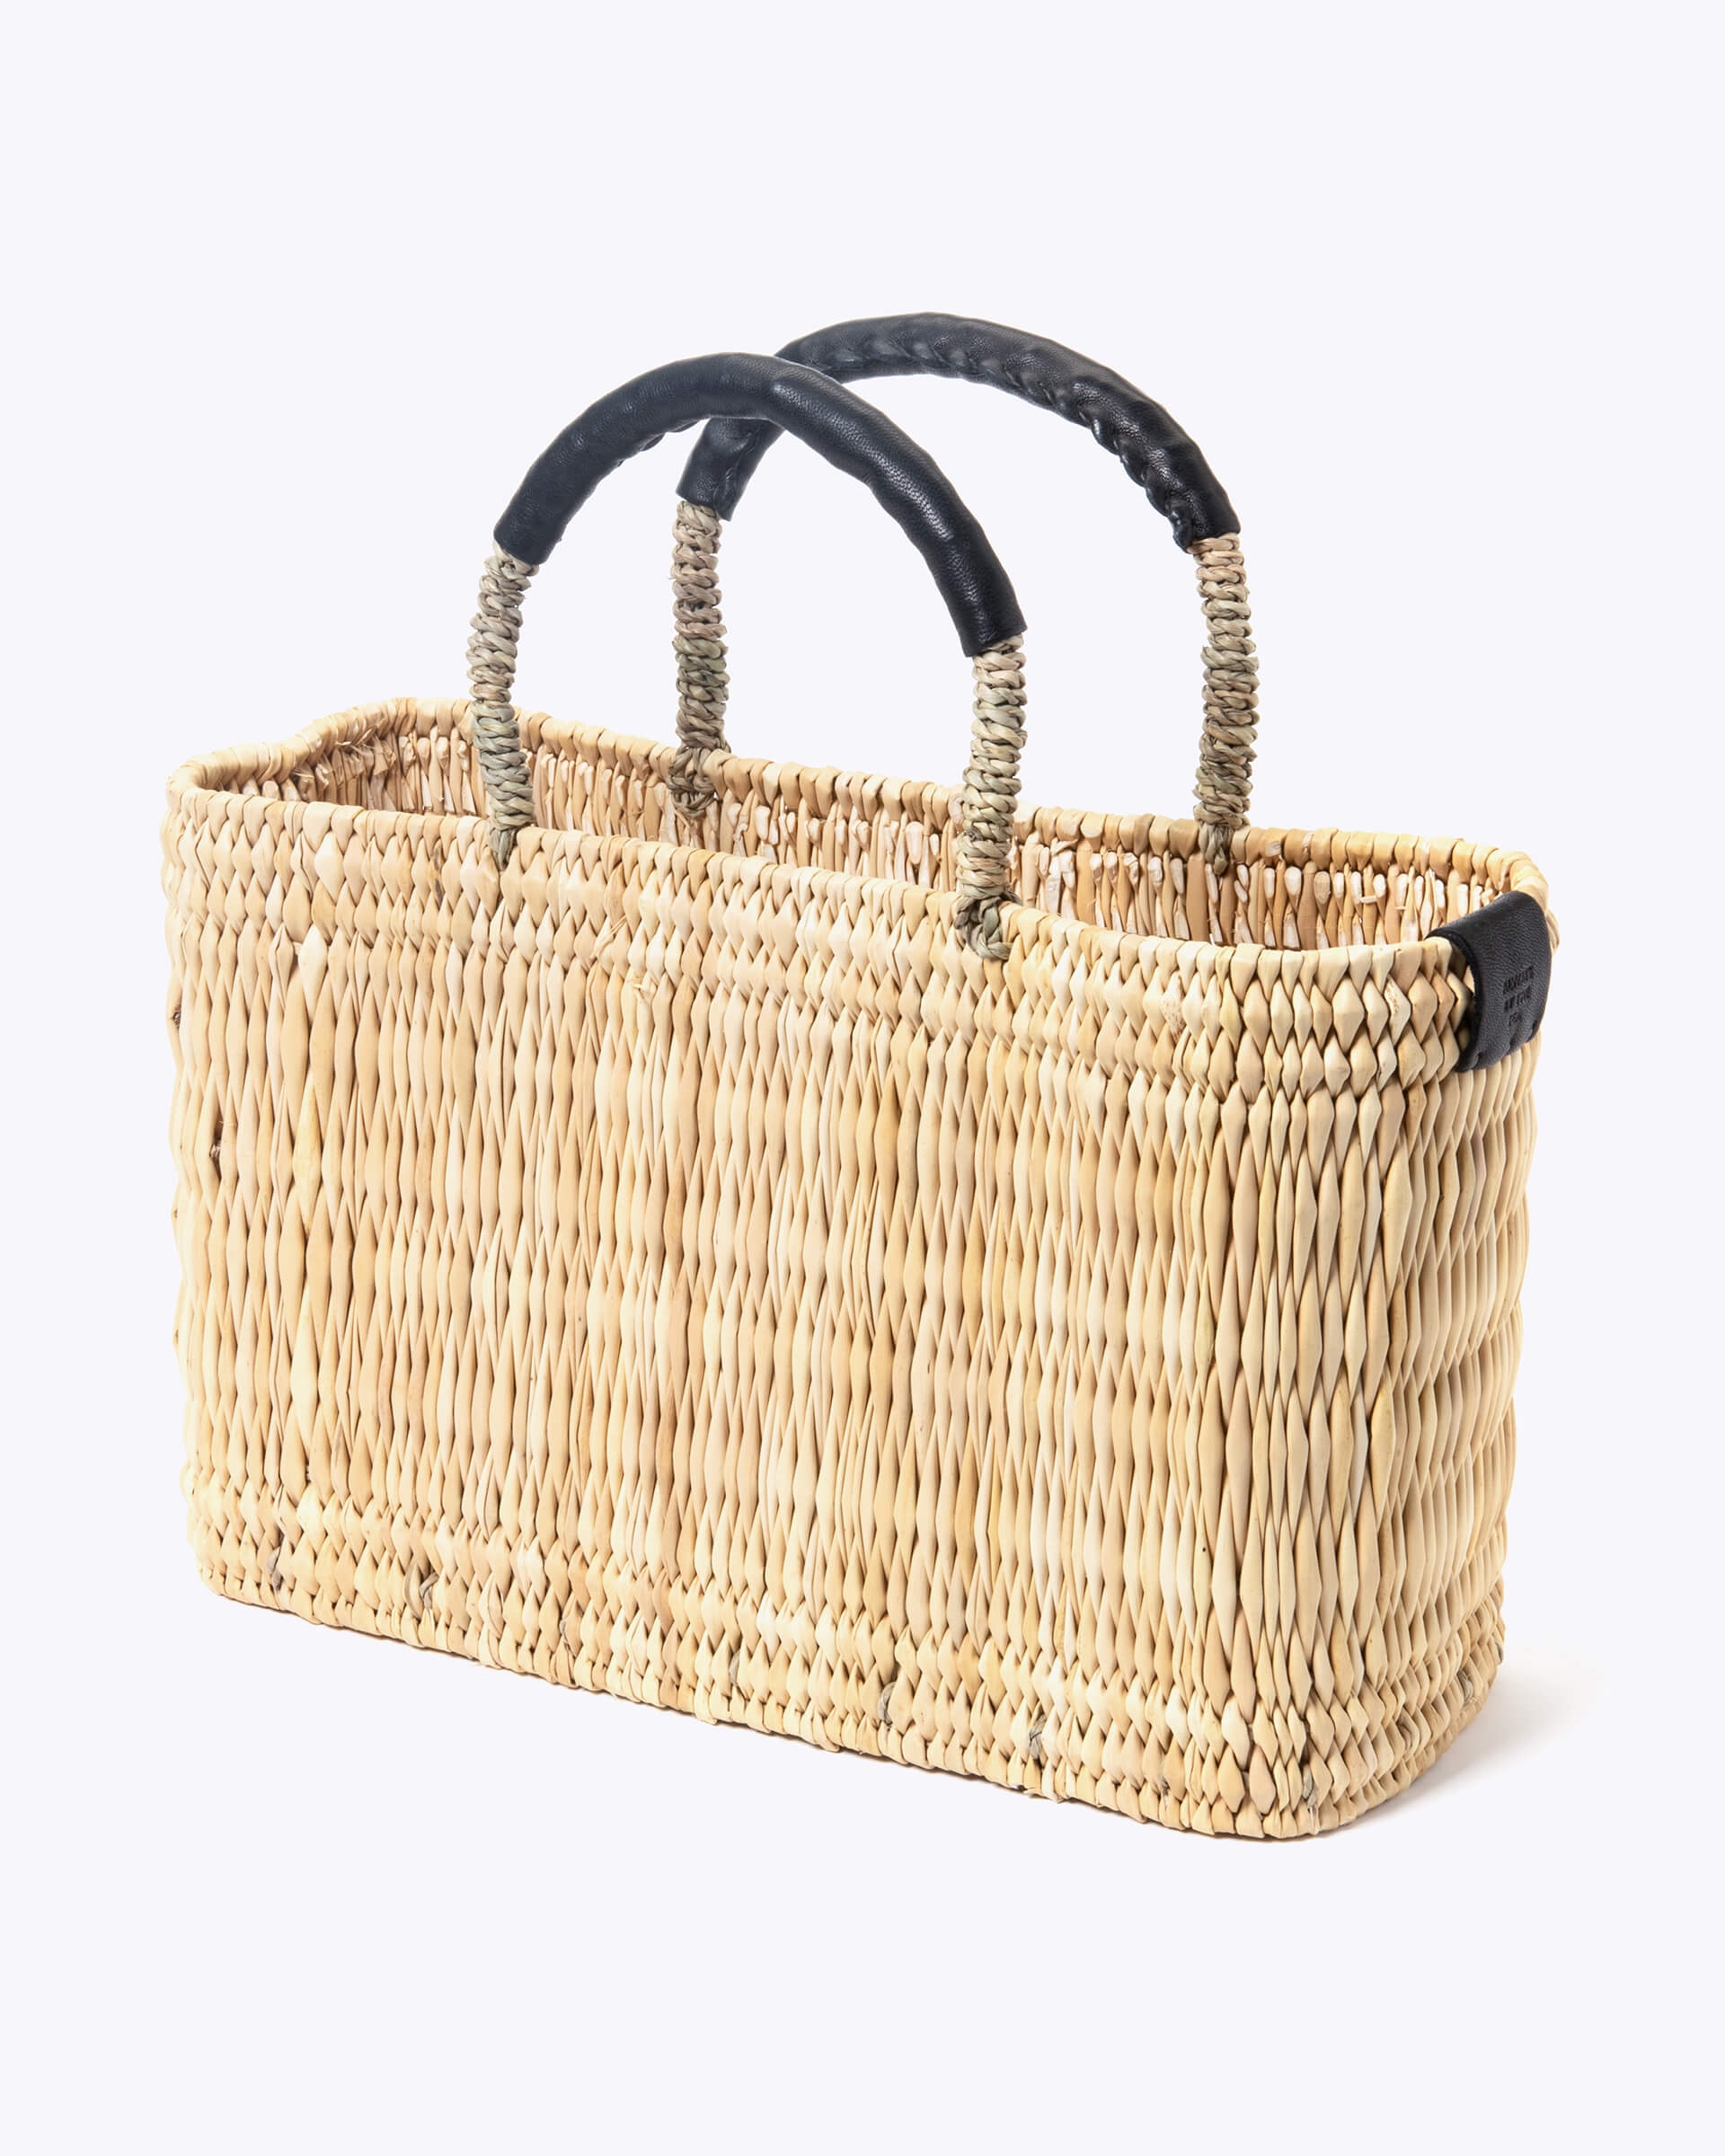 small straw basket wrapped with black leather handle on a white background at an angle